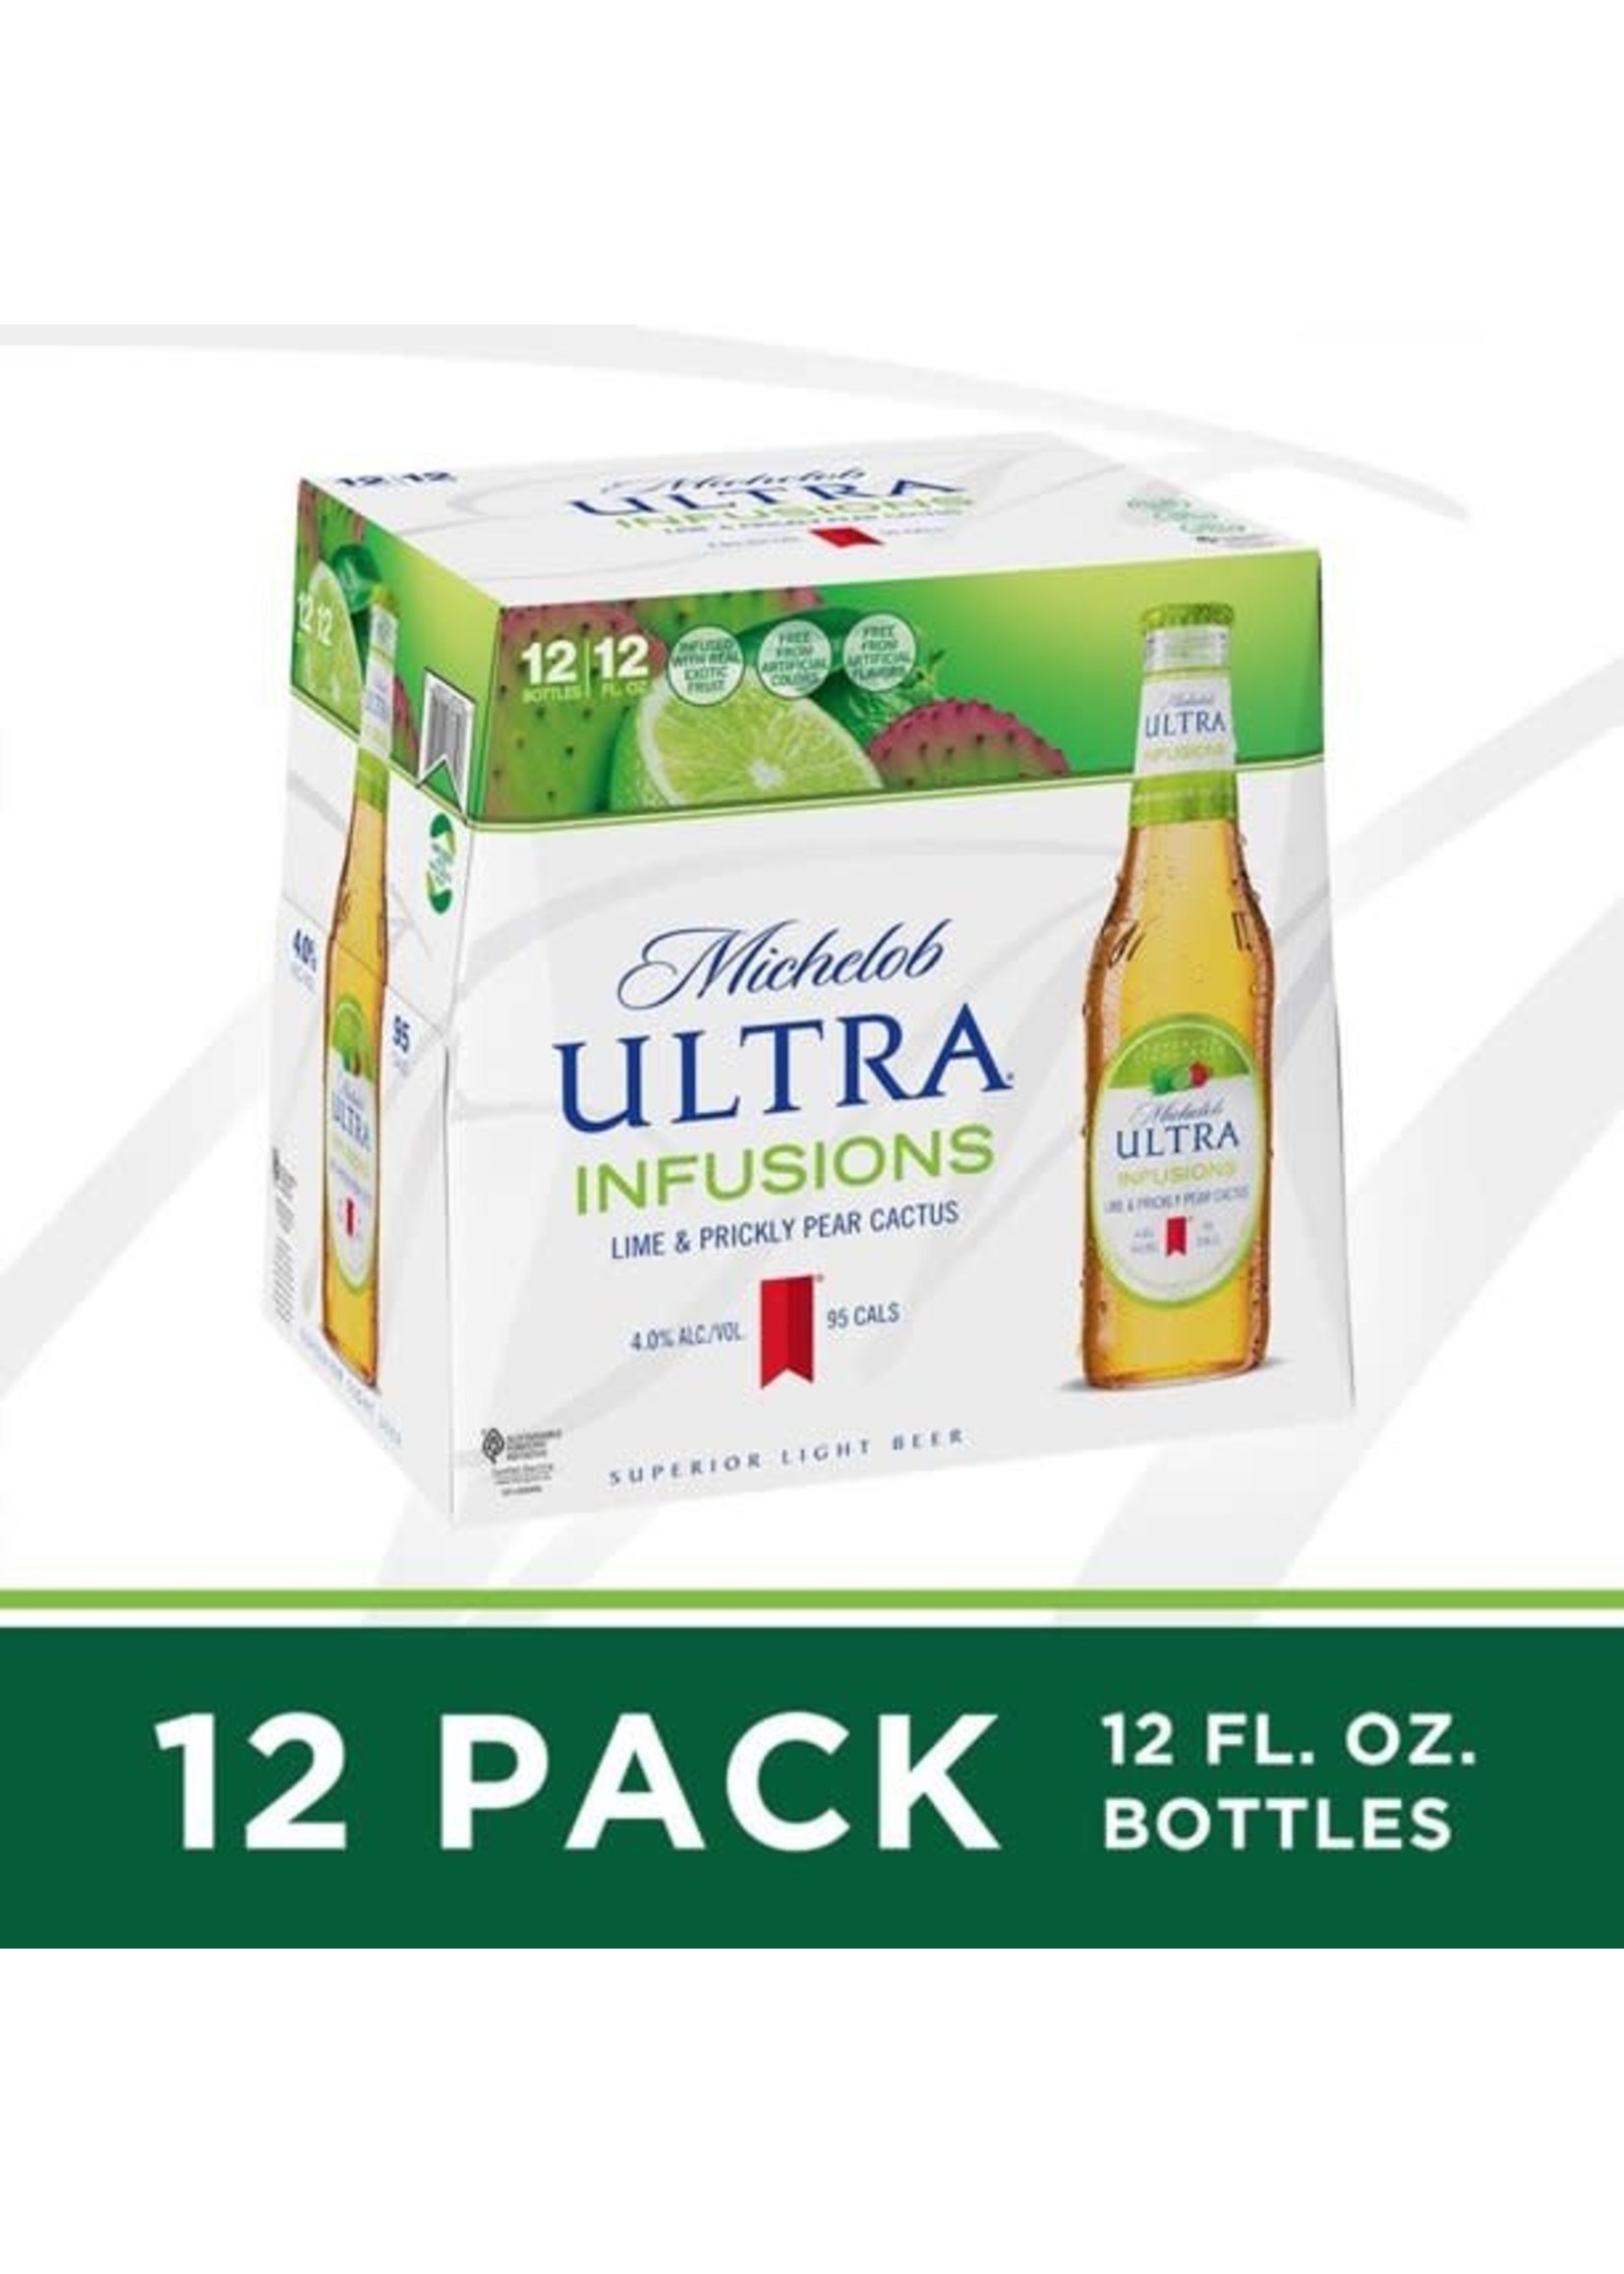 Michelob Ultra Infusions Lime & Prickly Pear Cactus 12pk 12oz Bottles